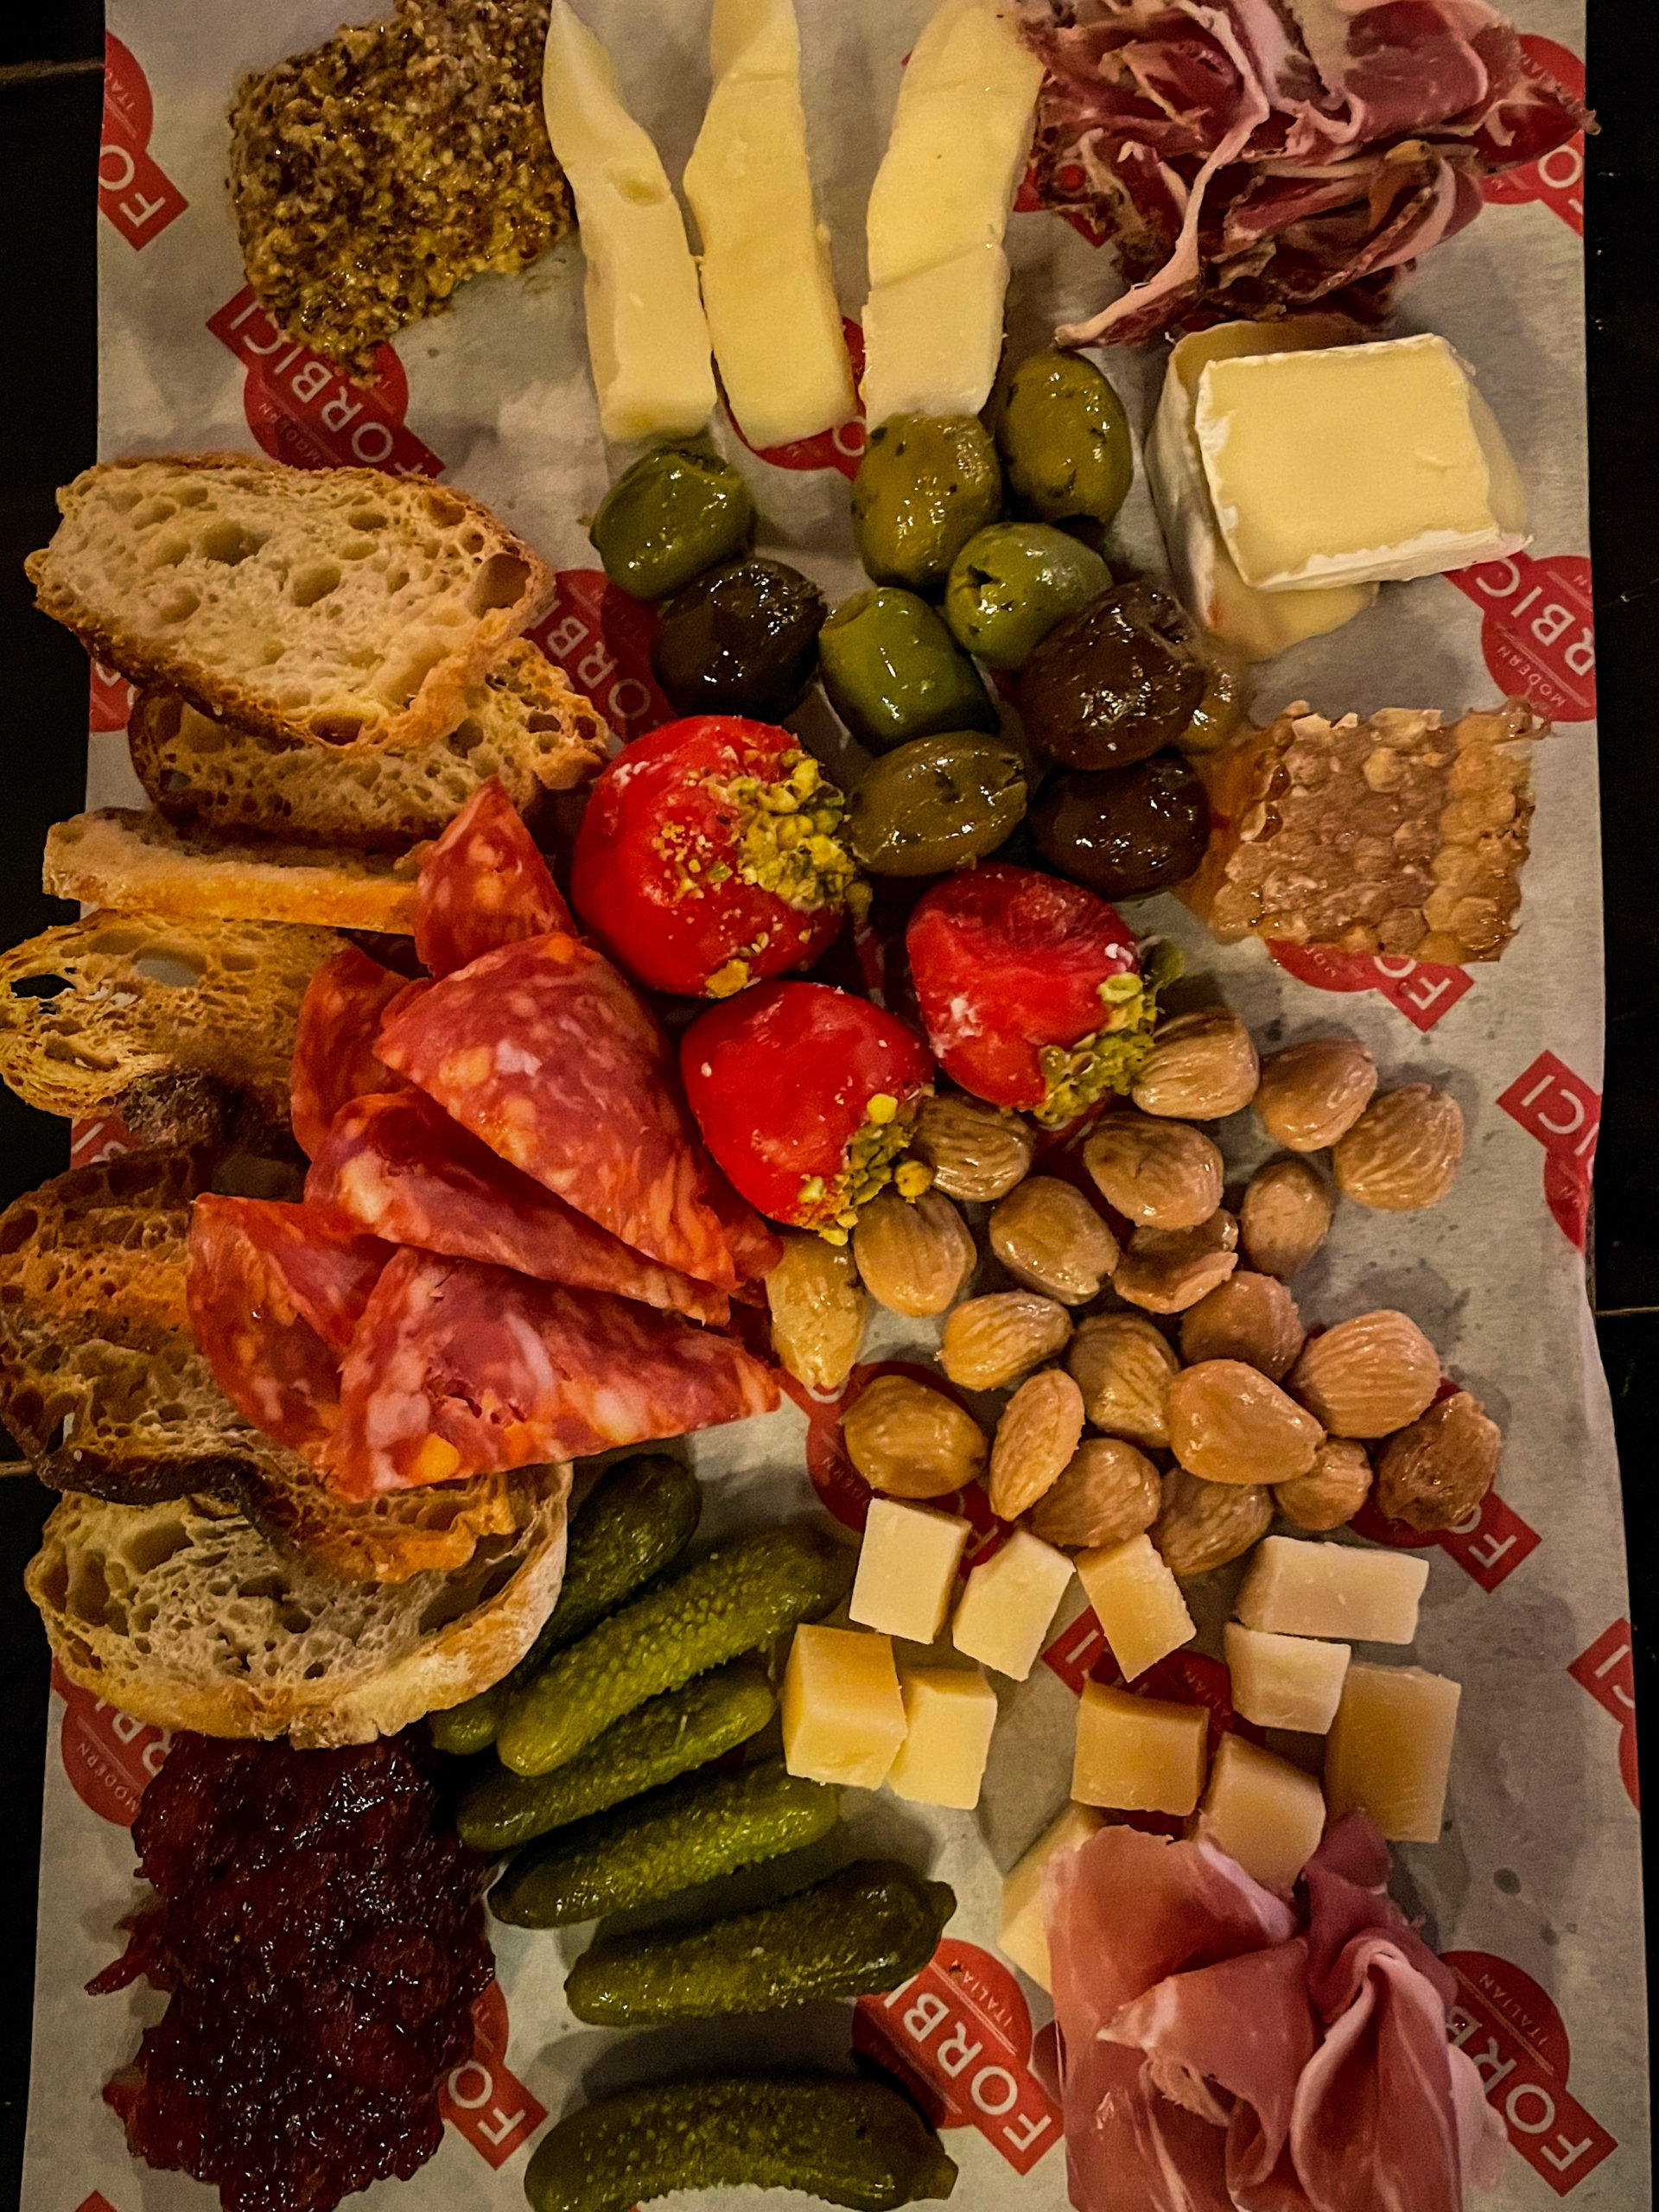 A scrumptious charcuterie board at Forbici Modern Italian in the Hyde Park neighborhood of Tampa Bay, featuring bread, salami, cheese, nuts, and more.